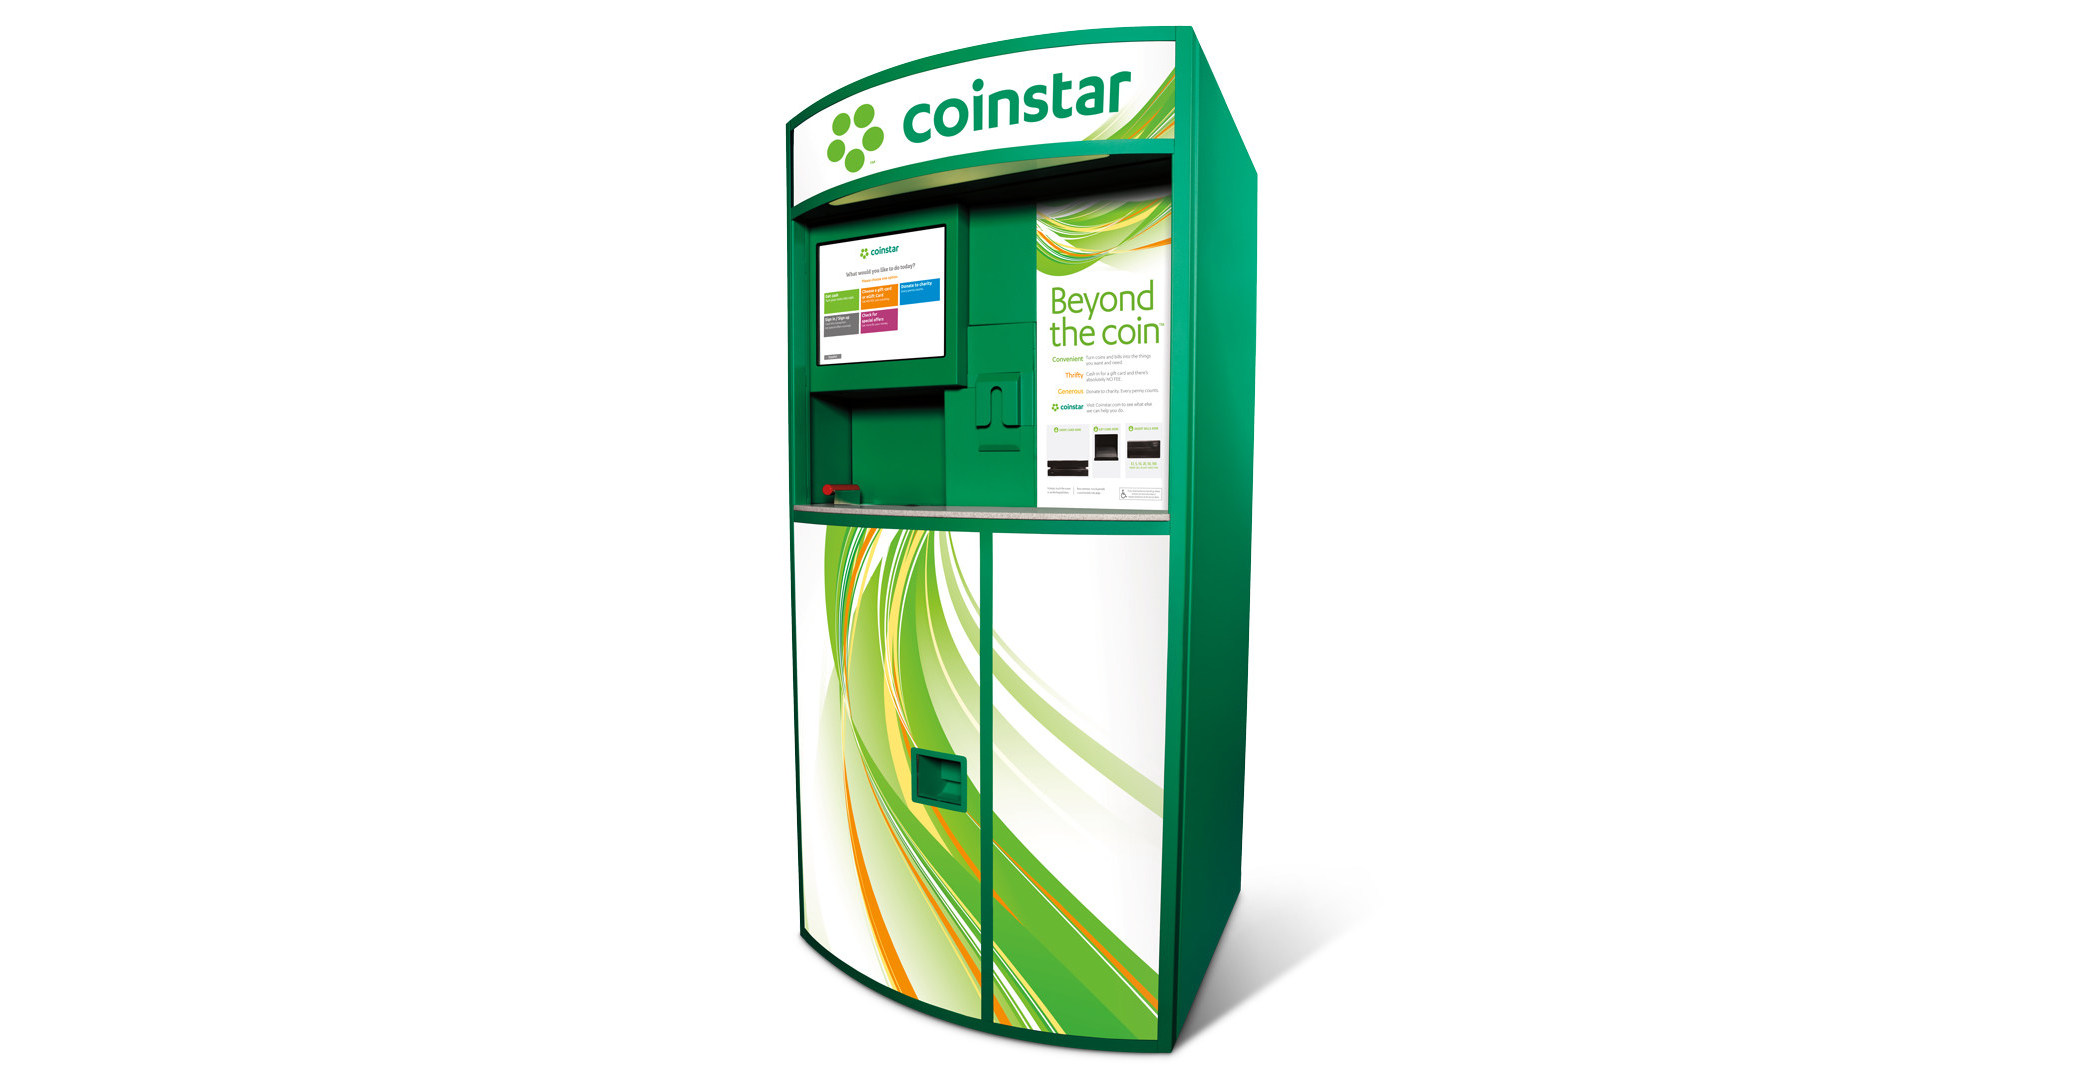 Coinstar Teams with Amazon to Provide Amazon Cash Reload Sites